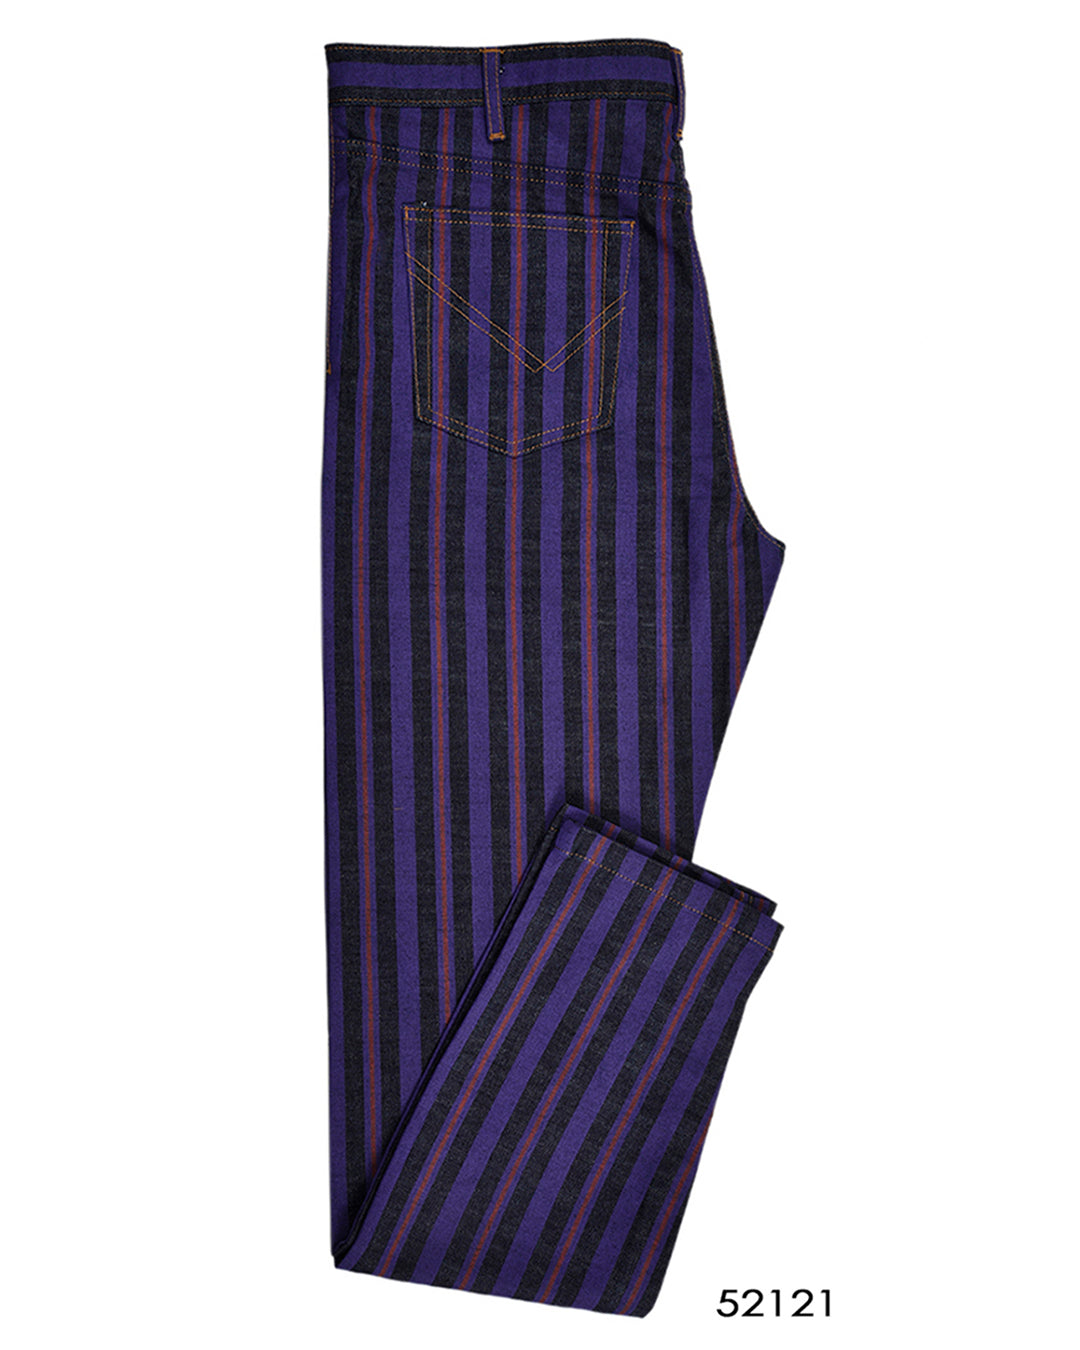 Side view of custom denim jeans for men by Luxire with purple stripes